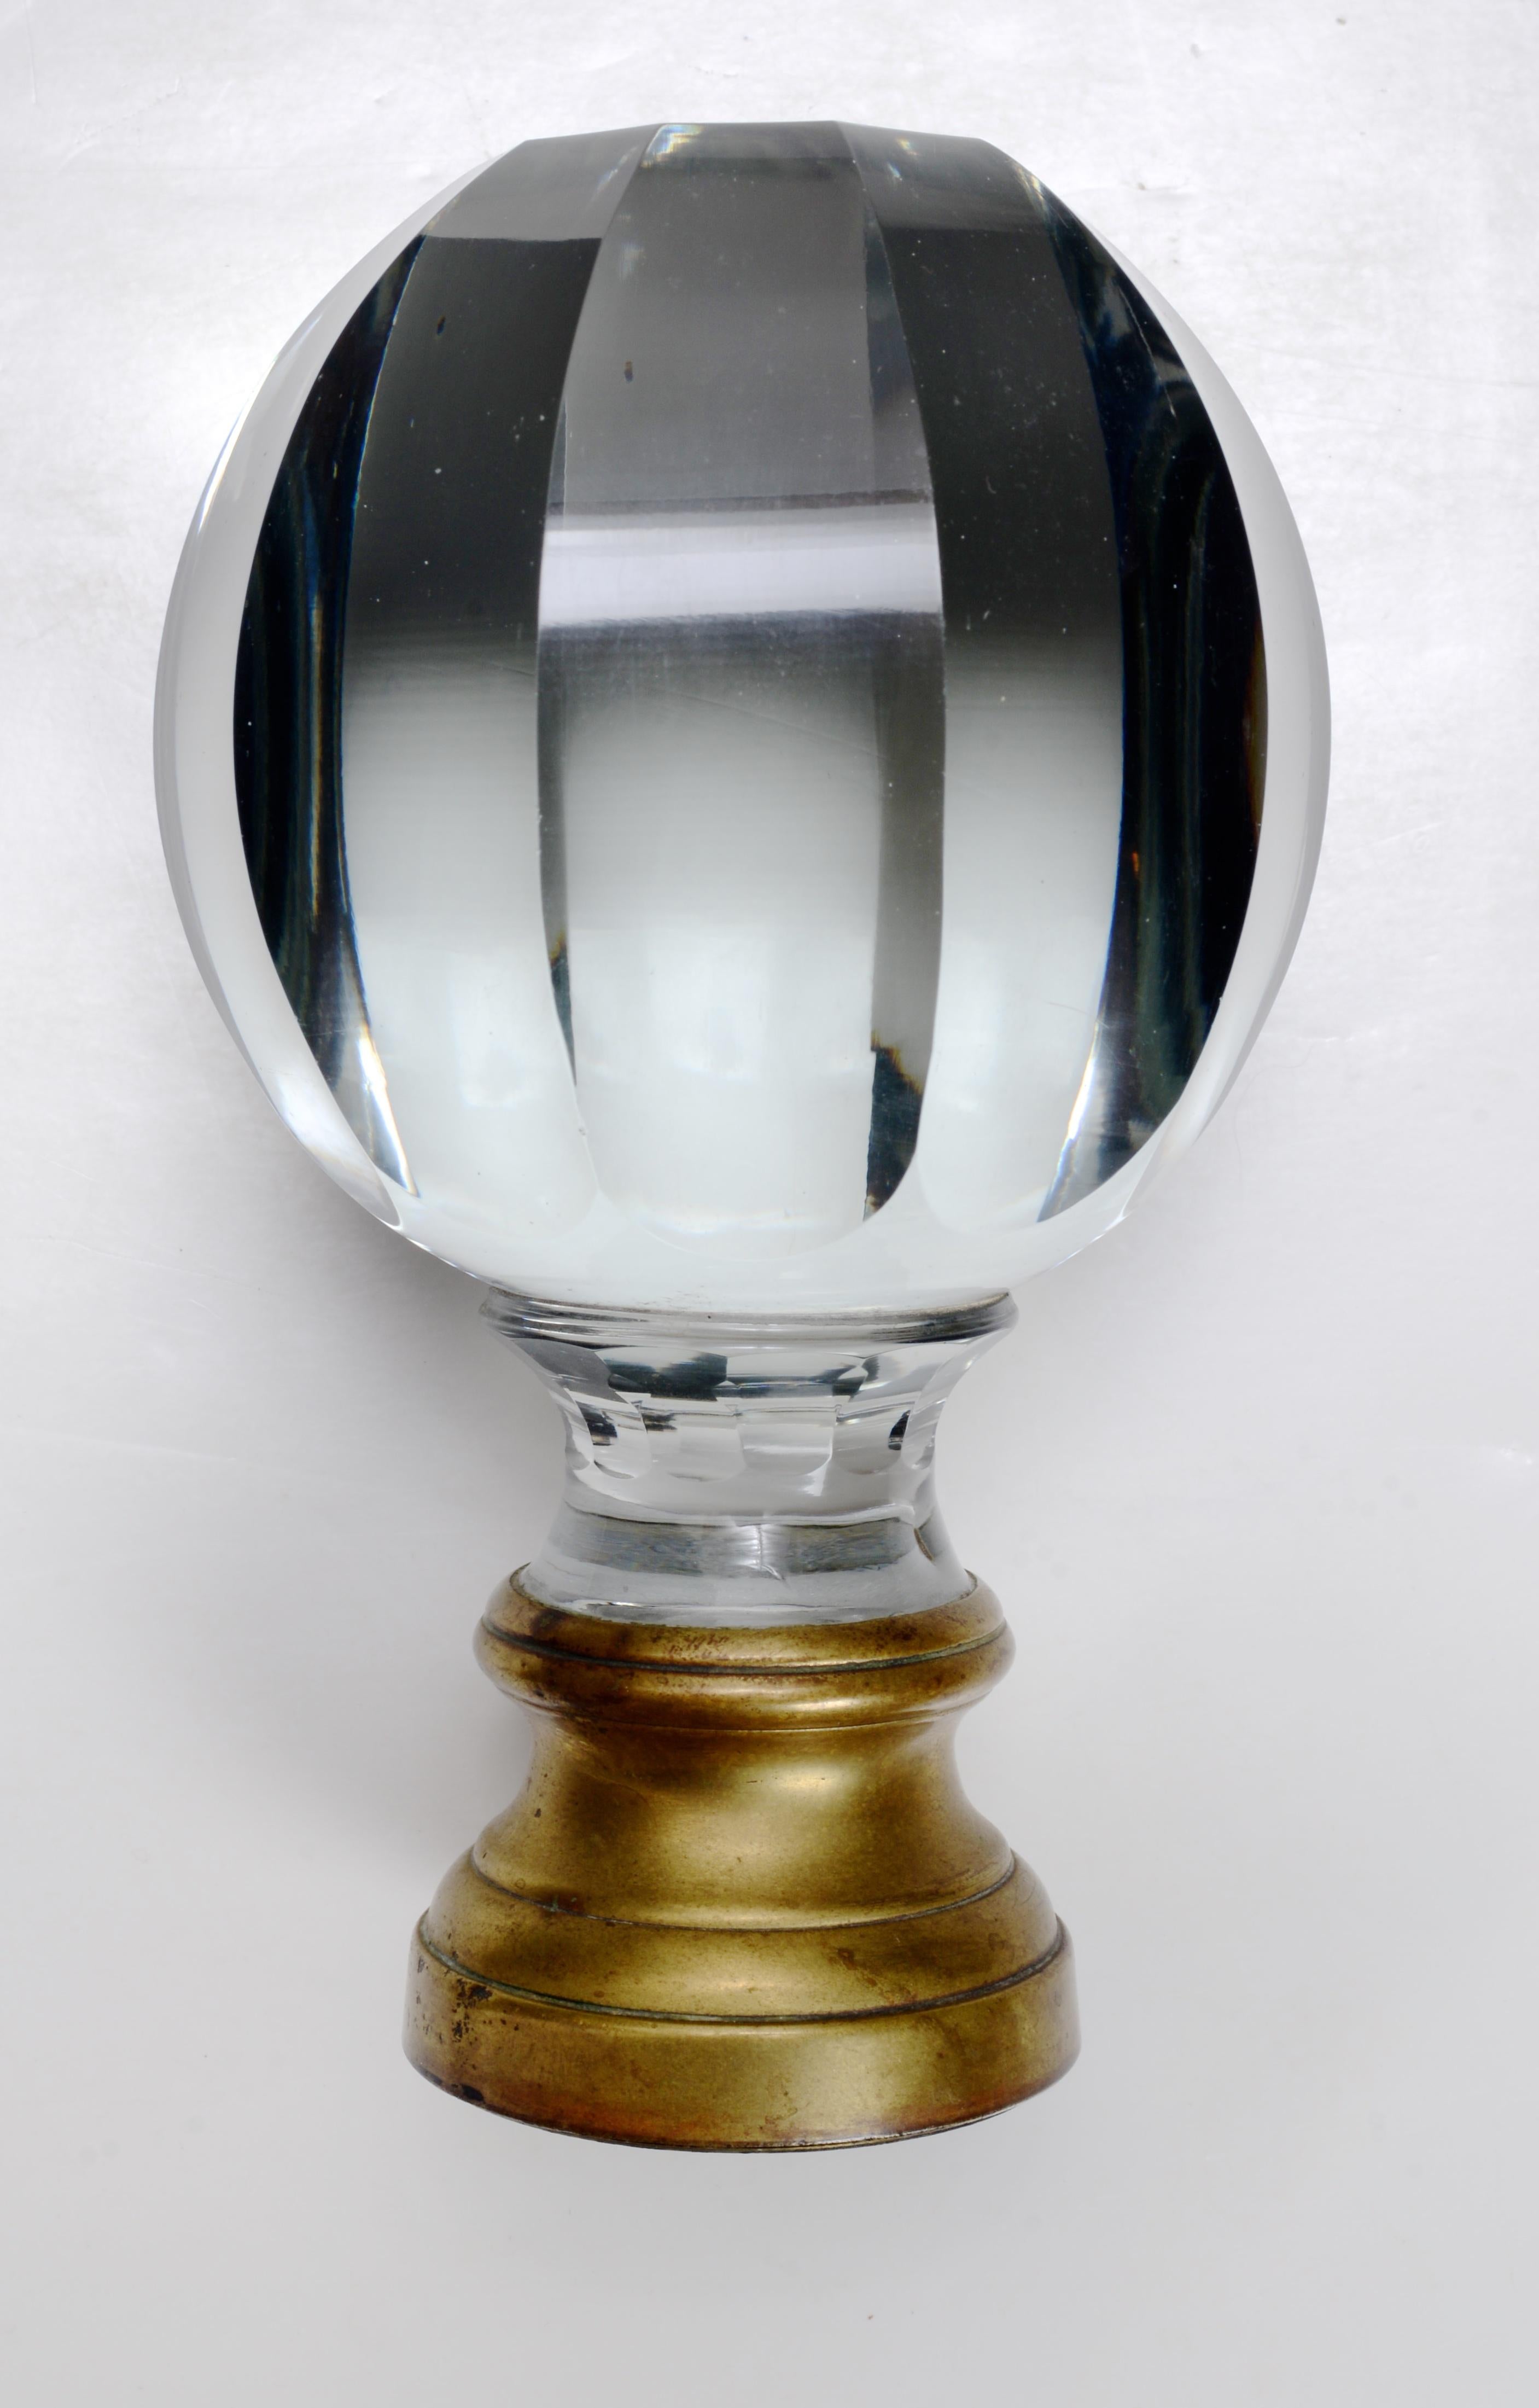 Large French Crystal, Boule d'Escalier Newel Post Finial, Late 19th c. With paneled sides mounted on original brass or bronze base.
Trent Antiques has been a respected name in antiques for over 30 years with a large collection of period furniture,